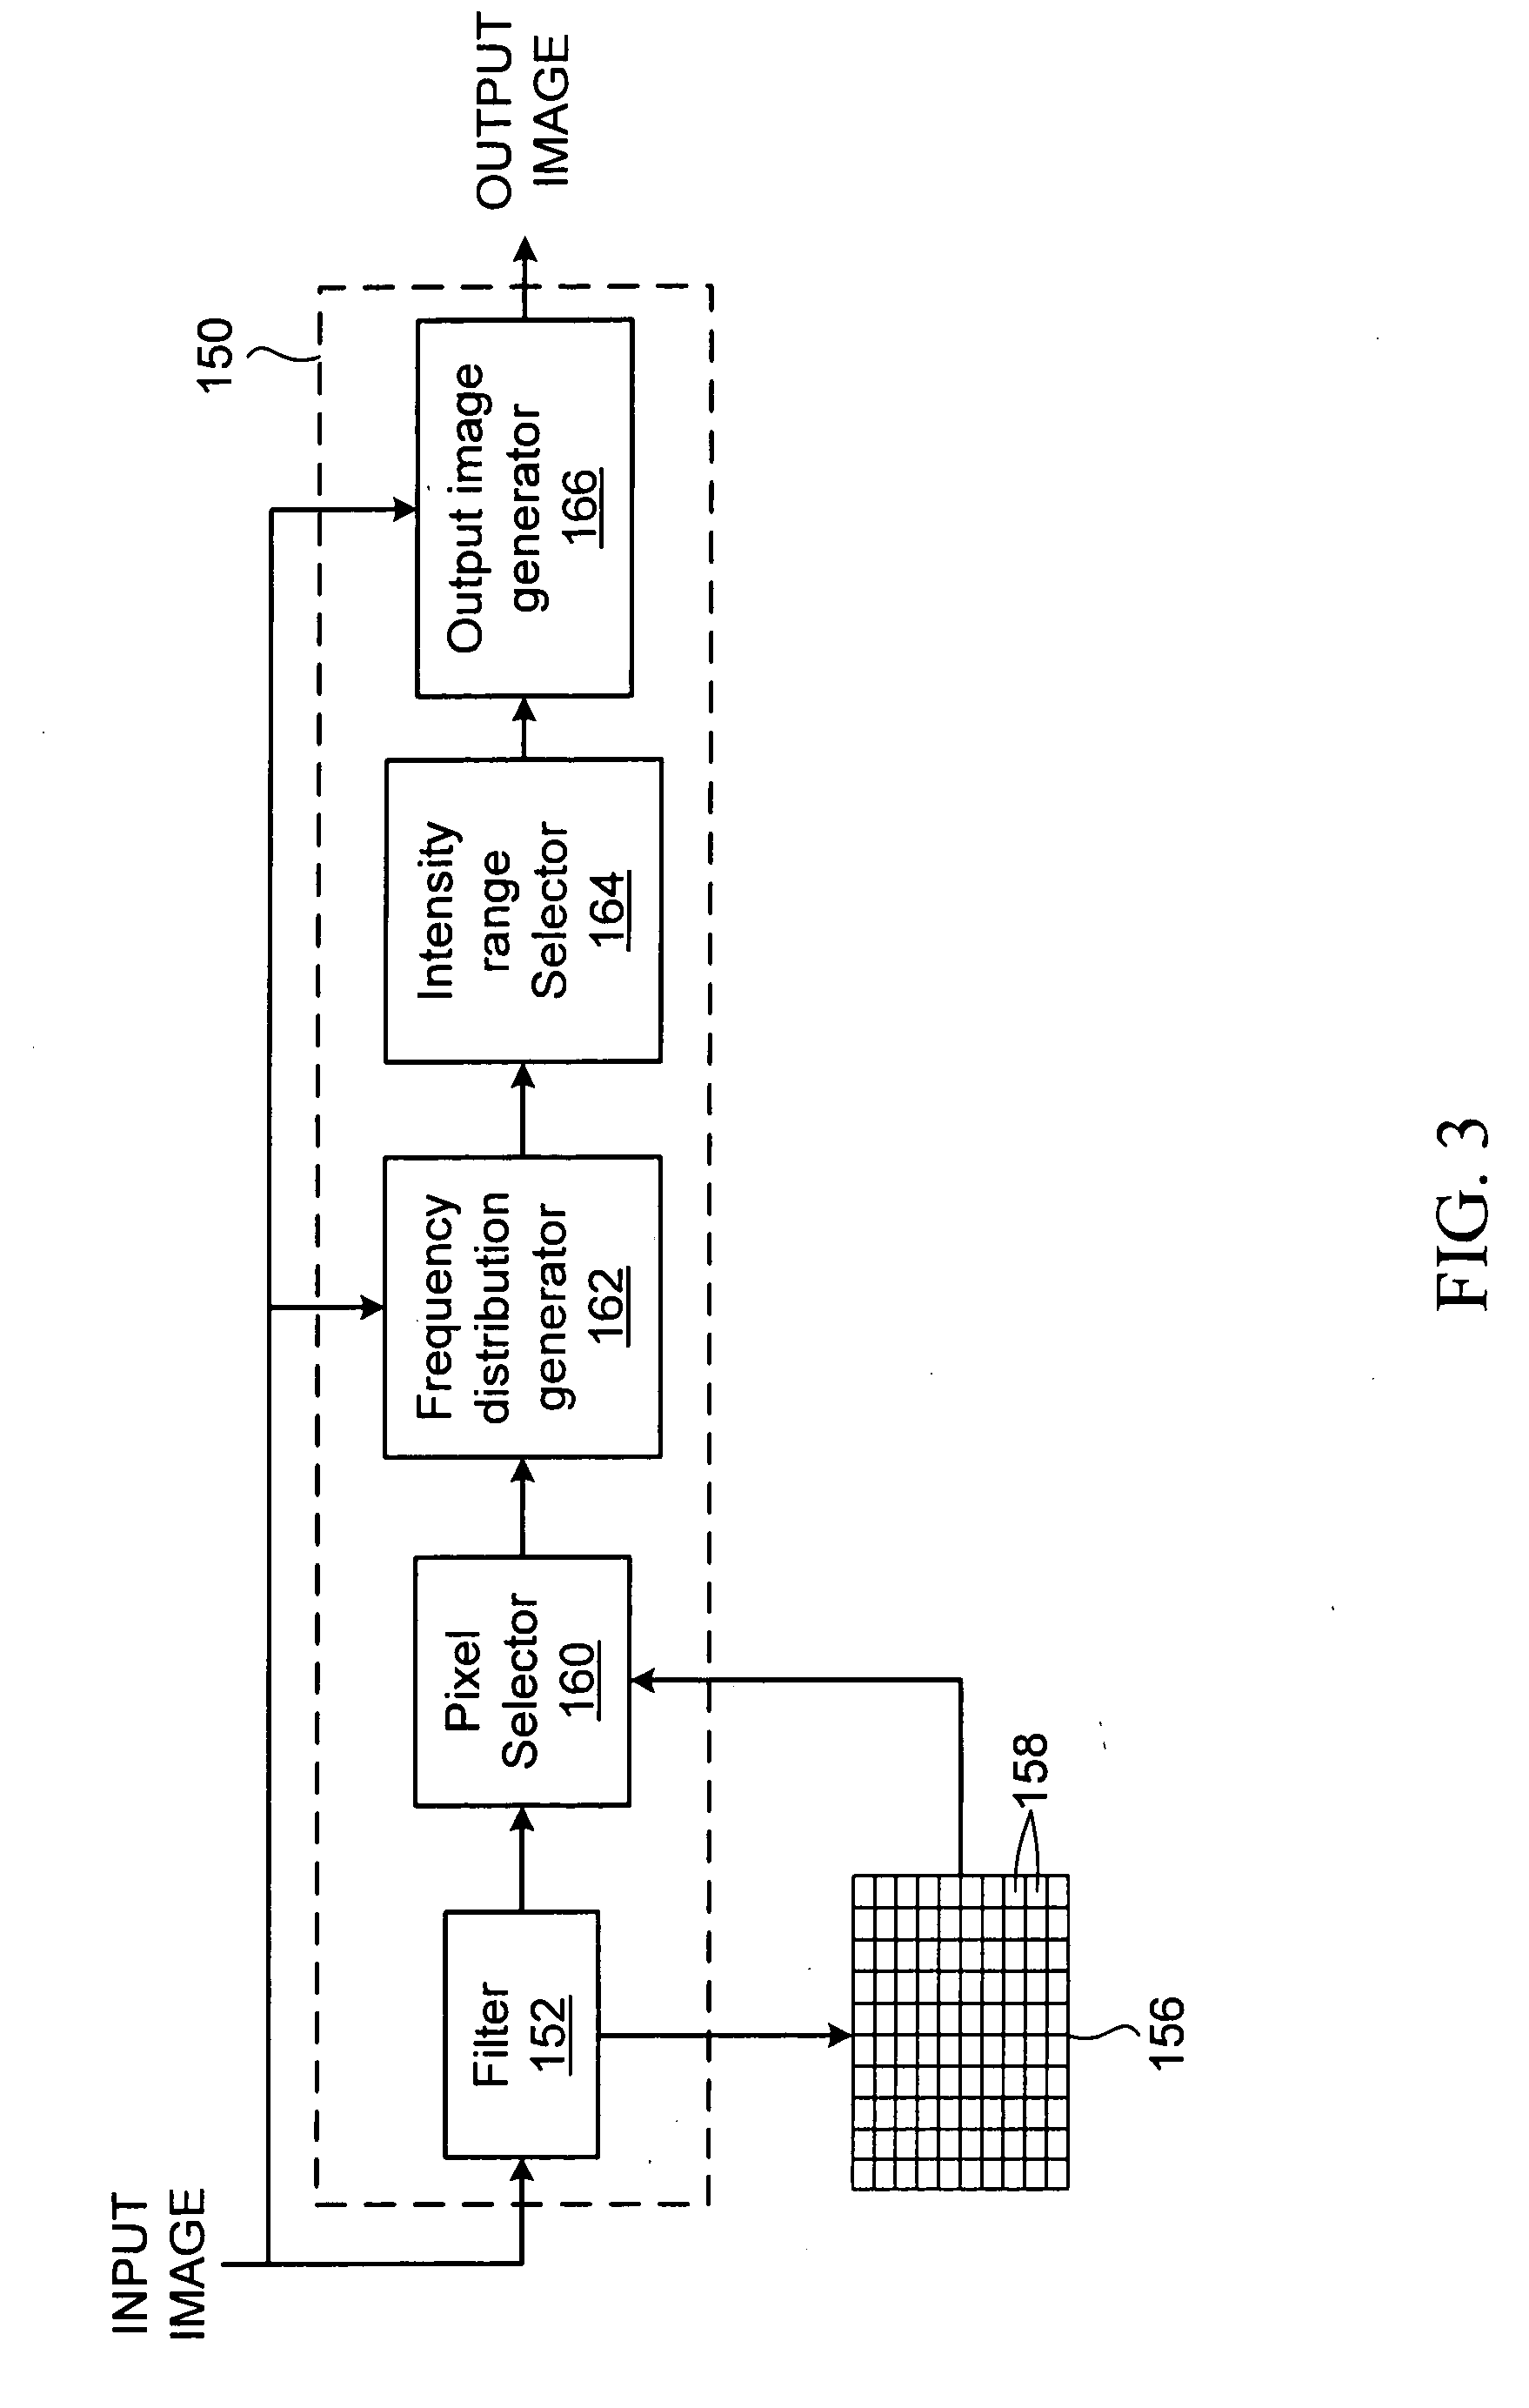 Method and apparatus for producing a contrast enhanced image